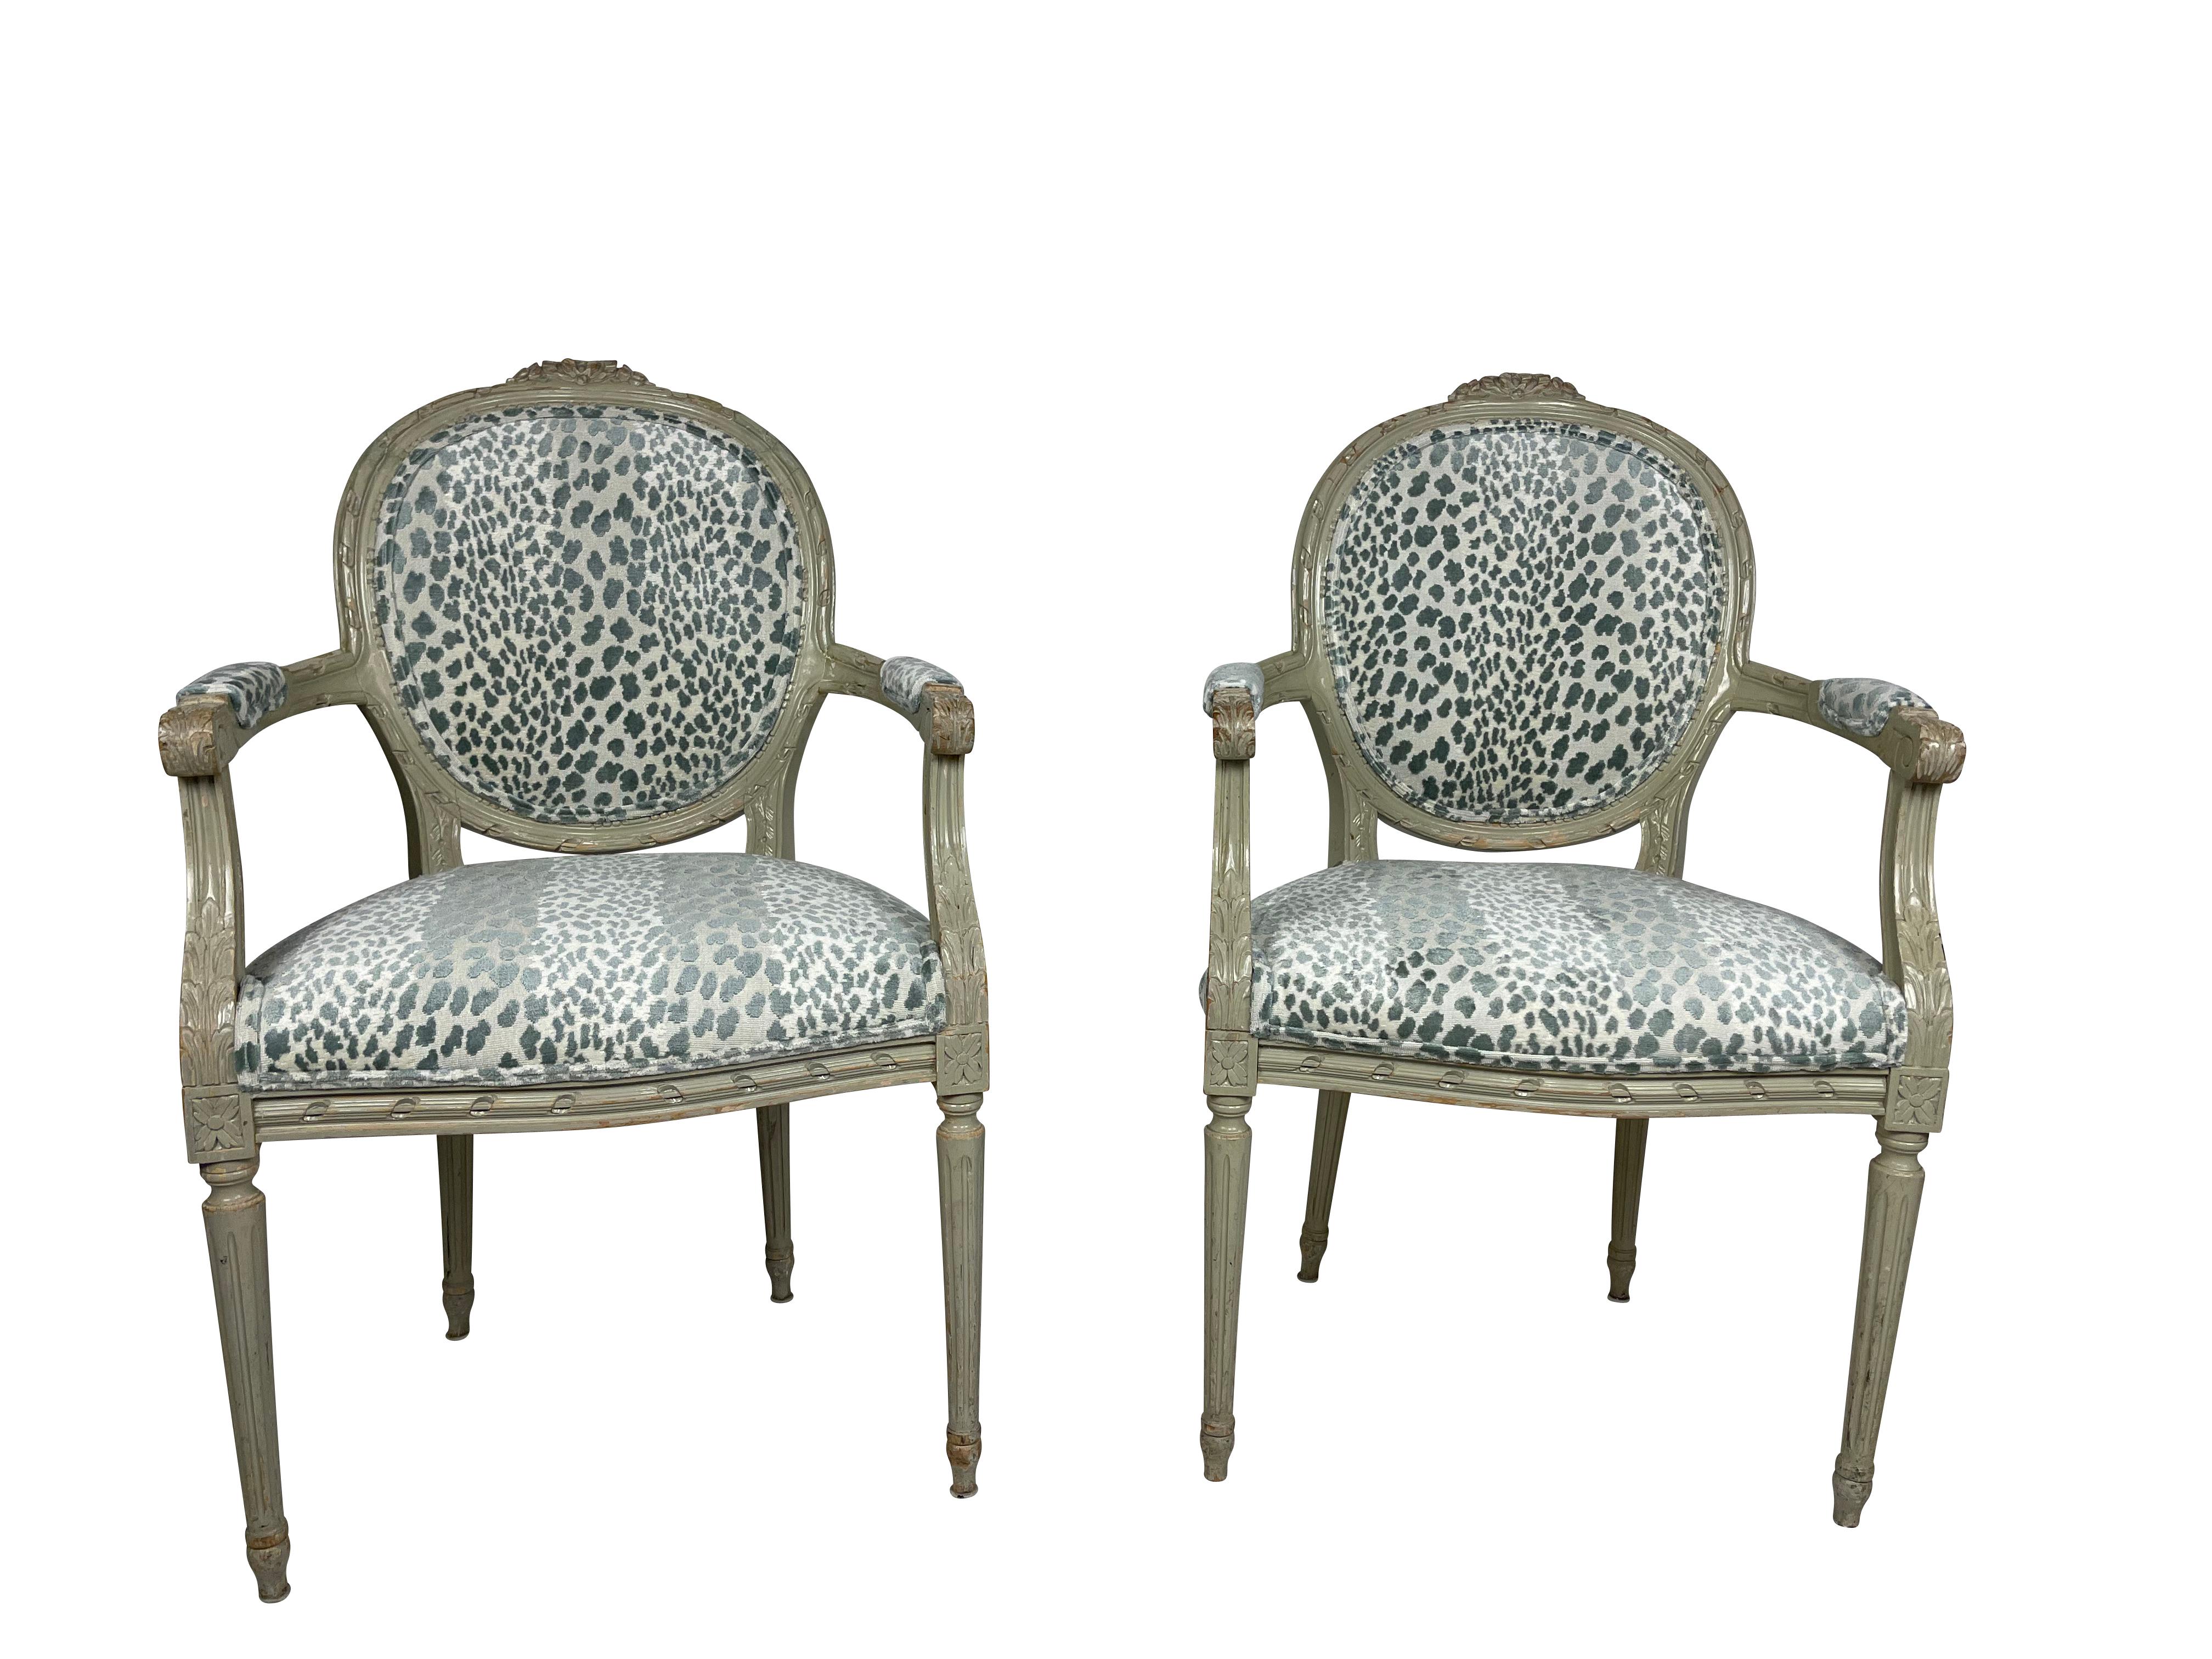 These lovely Louis XVI grey/green painted armchairs are original to the Waldorf Astoria Hotel, circa 1930-1940. They have been lovingly restored and reupholstered with a blue/green animal print velvet. They are nicely carved with floral and bow